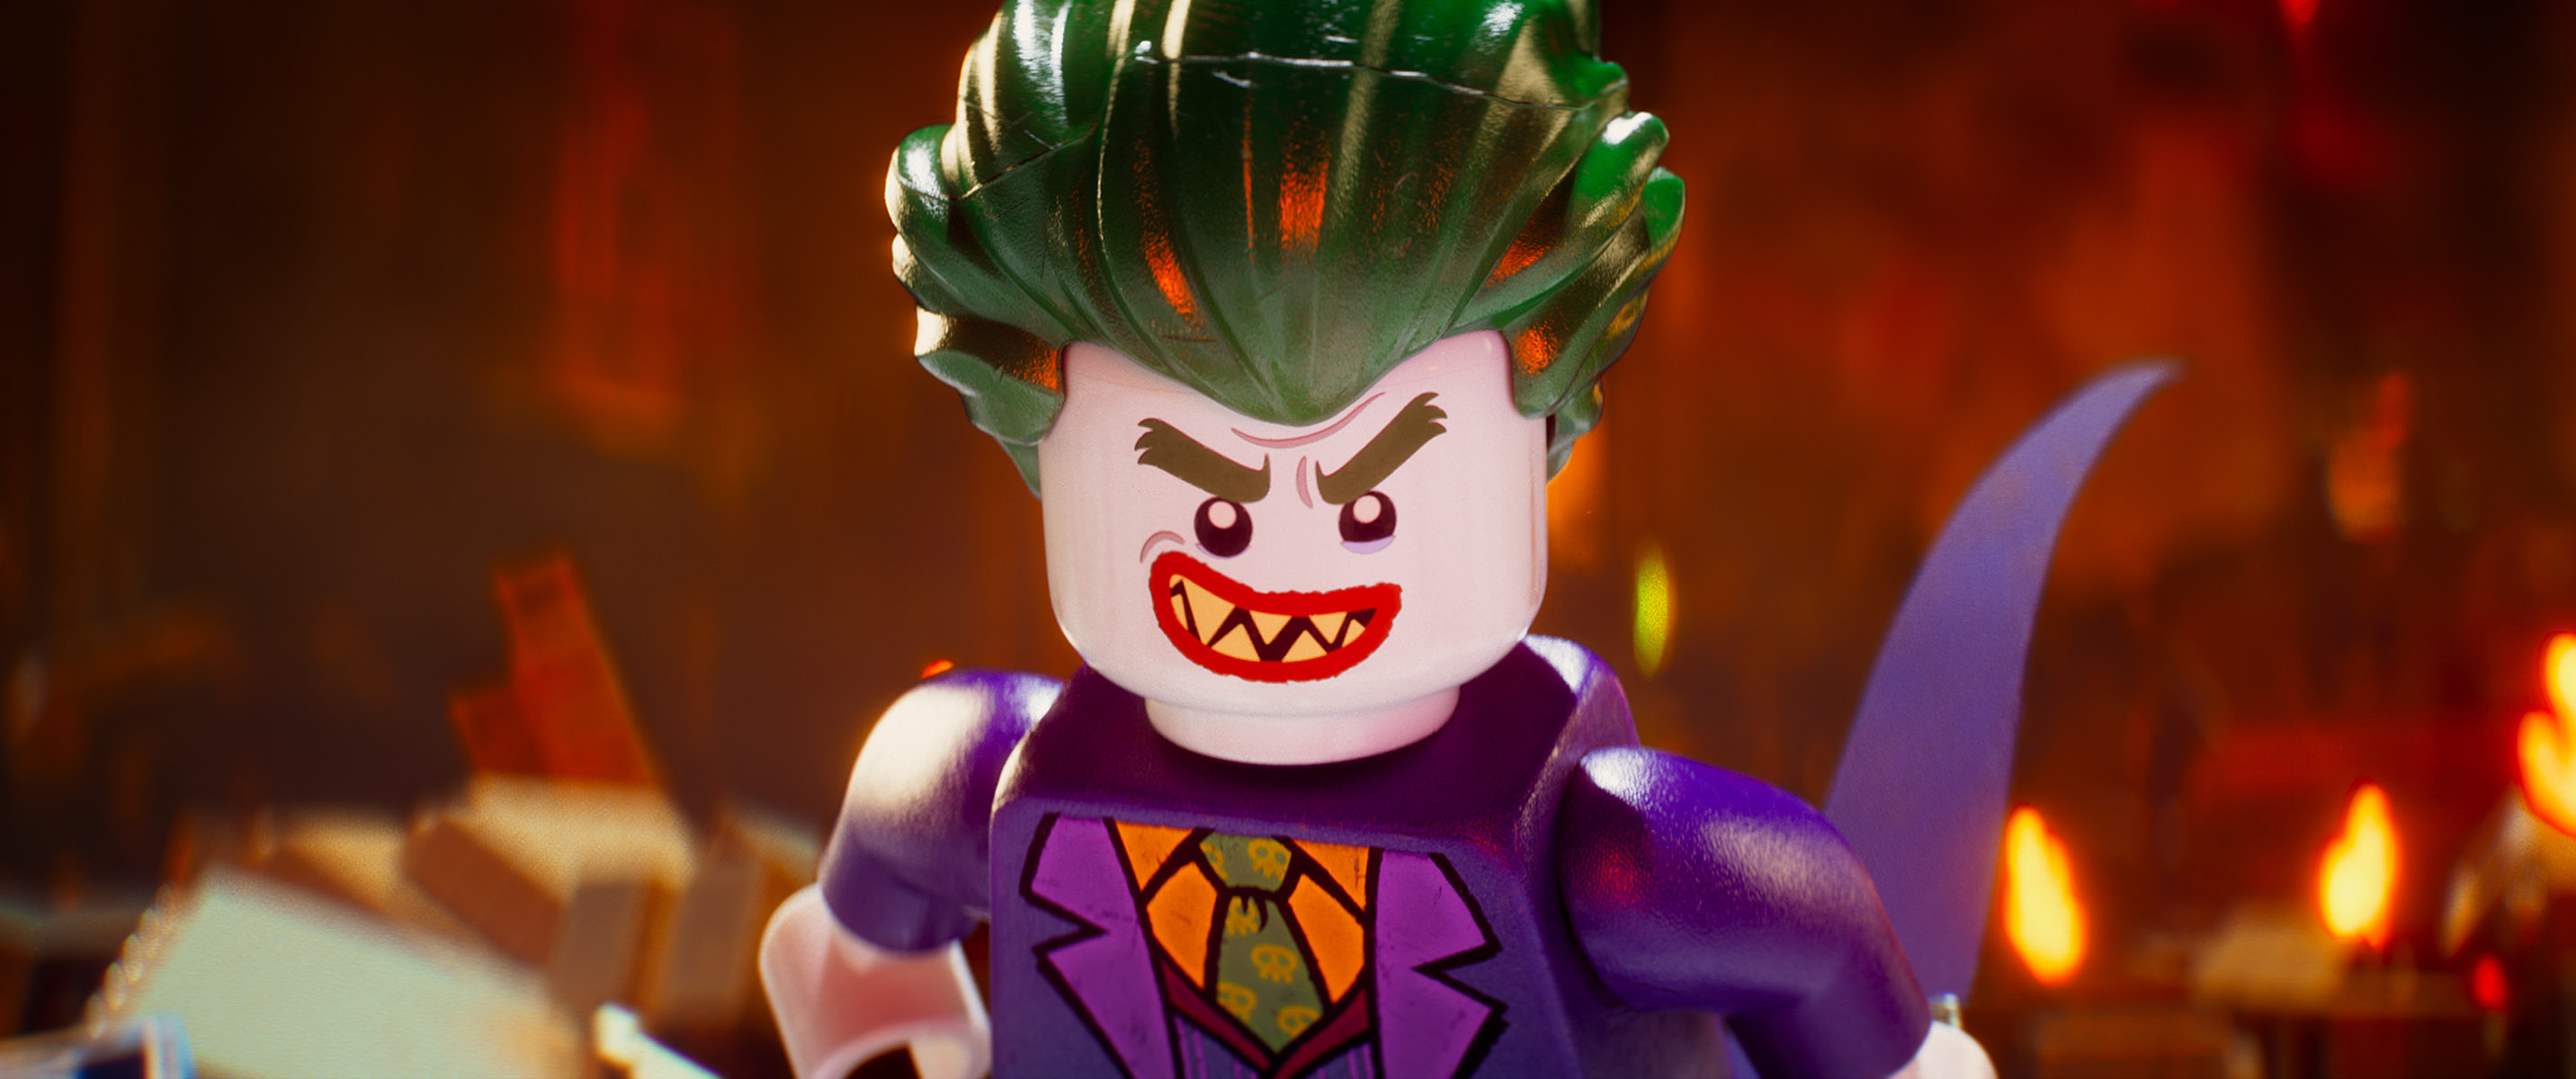 First look at The Joker and Robin from 'The LEGO Batman Movie' | Batman News